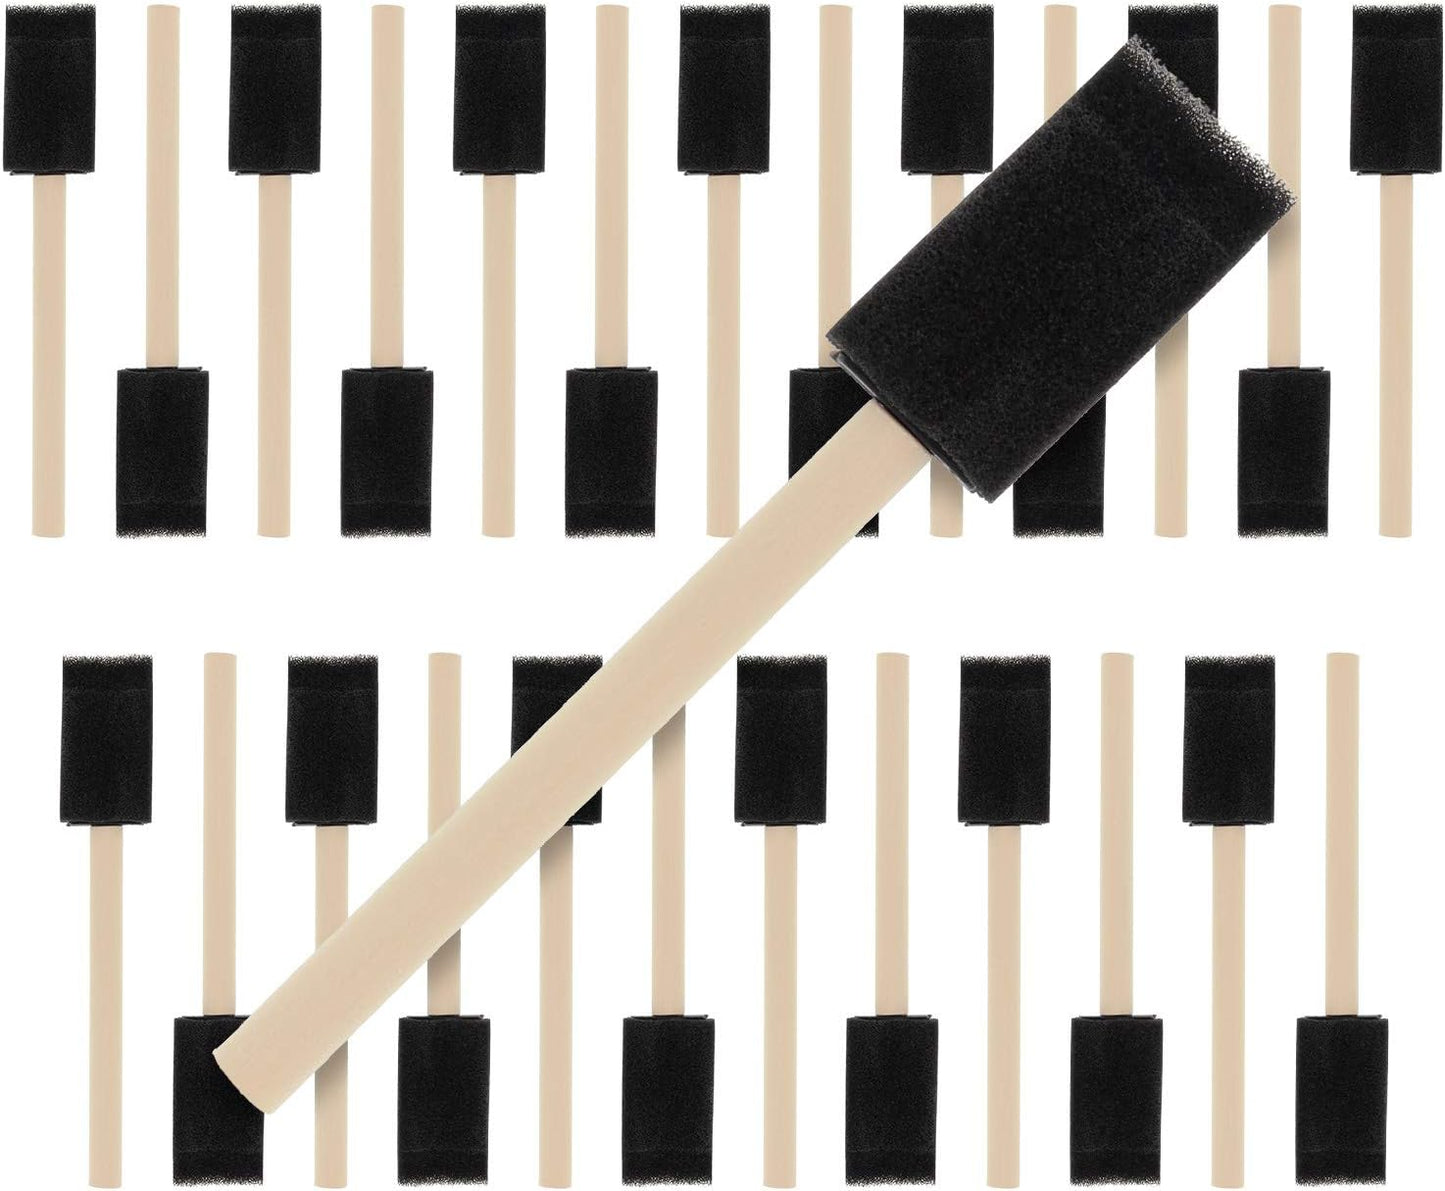 1 inch Foam Sponge Wood Handle Paint Brush Set (Value Pack of 25) - Lightweight, Durable and Great for Acrylics, Stains, Varnishes, Crafts, Art